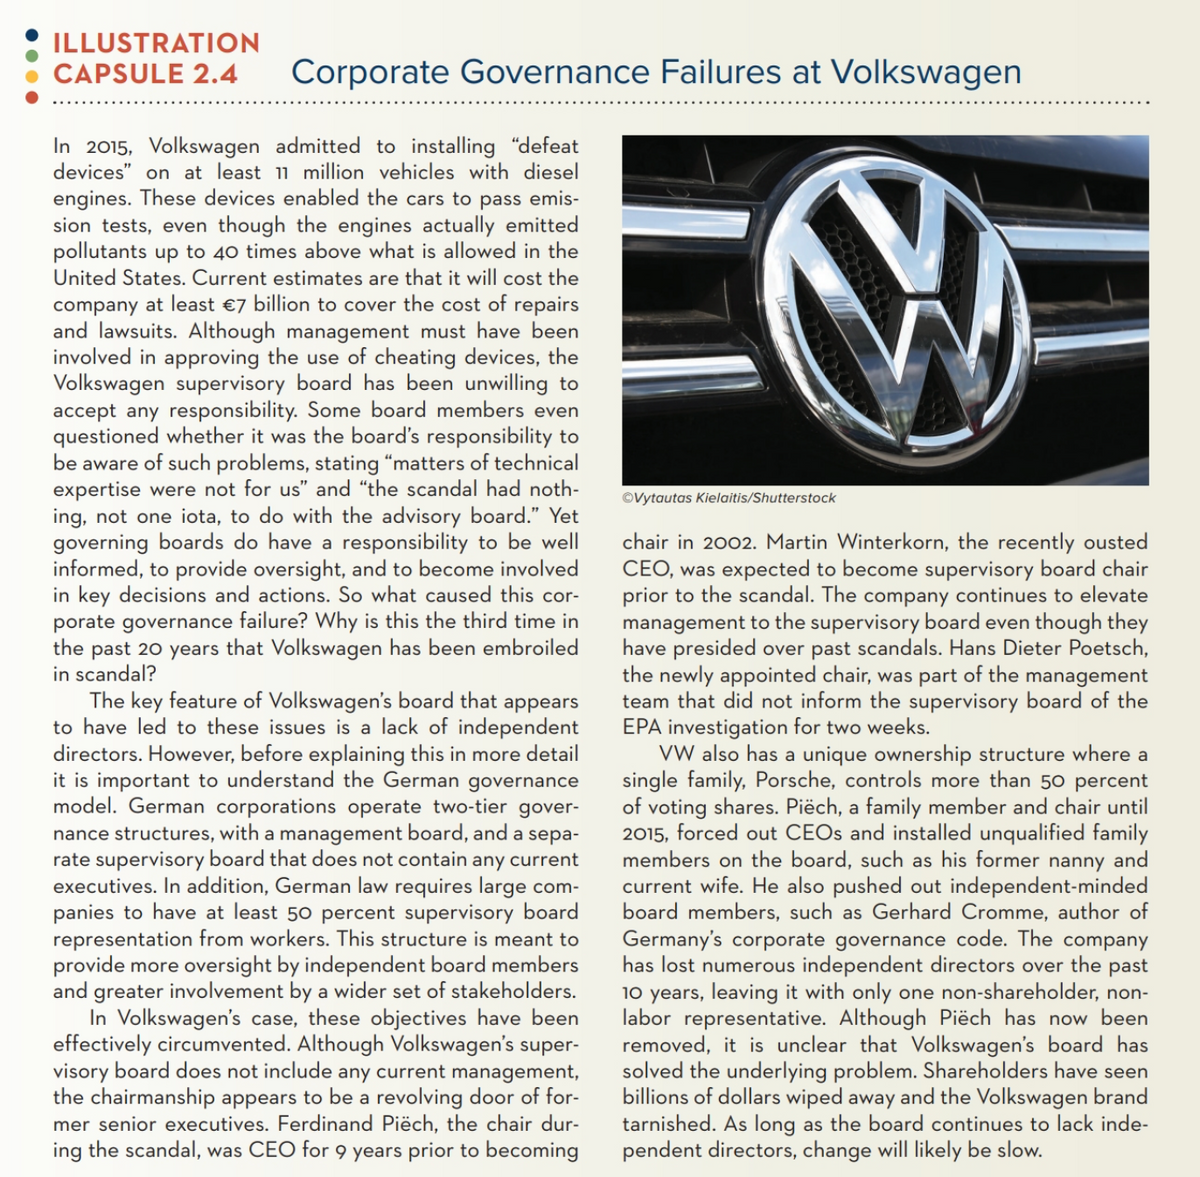 ILLUSTRATION
CAPSULE 2.4
Corporate Governance Failures at Volkswagen
In 2015, Volkswagen admitted to installing "defeat
devices" on at least 11 million vehicles with diesel
engines. These devices enabled the cars to pass emis-
sion tests, even though the engines actually emitted
pollutants up to 40 times above what is allowed in the
United States. Current estimates are that it will cost the
company at least €7 billion to cover the cost of repairs
and lawsuits. Although management must have been
involved in approving the use of cheating devices, the
Volkswagen supervisory board has been unwilling to
accept any responsibility. Some board members even
questioned whether it was the board's responsibility to
be aware of such problems, stating “matters of technical
expertise were not for us" and “the scandal had noth-
ing, not one iota, to do with the advisory board." Yet
governing boards do have a responsibility to be well
informed, to provide oversight, and to become involved
in key decisions and actions. So what caused this cor-
porate governance failure? Why is this the third time in
the past 20 years that Volkswagen has been embroiled
in scandal?
The key feature of Volkswagen's board that appears
to have led to these issues is a lack of independent
directors. However, before explaining this in more detail
it is important to understand the German governance
model. German corporations operate two-tier gover-
nance structures, with a management board, and a sepa-
rate supervisory board that does not contain any current
executives. In addition, German law requires large com-
panies to have at least 50 percent supervisory board
representation from workers. This structure is meant to
provide more oversight by independent board members
and greater involvement by a wider set of stakeholders.
In Volkswagen's case, these objectives have been
effectively circumvented. Although Volkswagen's super-
visory board does not include any current management,
the chairmanship appears to be a revolving door of for-
mer senior executives. Ferdinand Piëch, the chair dur-
ing the scandal, was CEO for 9 years prior to becoming
©Vytautas Kielaitis/Shutterstock
chair in 2002. Martin Winterkorn, the recently ousted
CEO, was expected to become supervisory board chair
prior to the scandal. The company continues to elevate
management to the supervisory board even though they
have presided over past scandals. Hans Dieter Poetsch,
the newly appointed chair, was part of the management
team that did not inform the supervisory board of the
EPA investigation for two weeks.
VW also has a unique ownership structure where a
single family, Porsche, controls more than 50 percent
of voting shares. Piëch, a family member and chair until
2015, forced out CEOS and installed unqualified family
members on the board, such as his former nanny and
current wife. He also pushed out independent-minded
board members, such as Gerhard Cromme, author of
Germany's corporate governance code. The company
has lost numerous independent directors over the past
10 years, leaving it with only one non-shareholder, non-
labor representative. Although Piëch has now been
removed, it is unclear that Volkswagen's board has
solved the underlying problem. Shareholders have seen
billions of dollars wiped away and the Volkswagen brand
tarnished. As long as the board continues to lack inde-
pendent directors, change will likely be slow.
